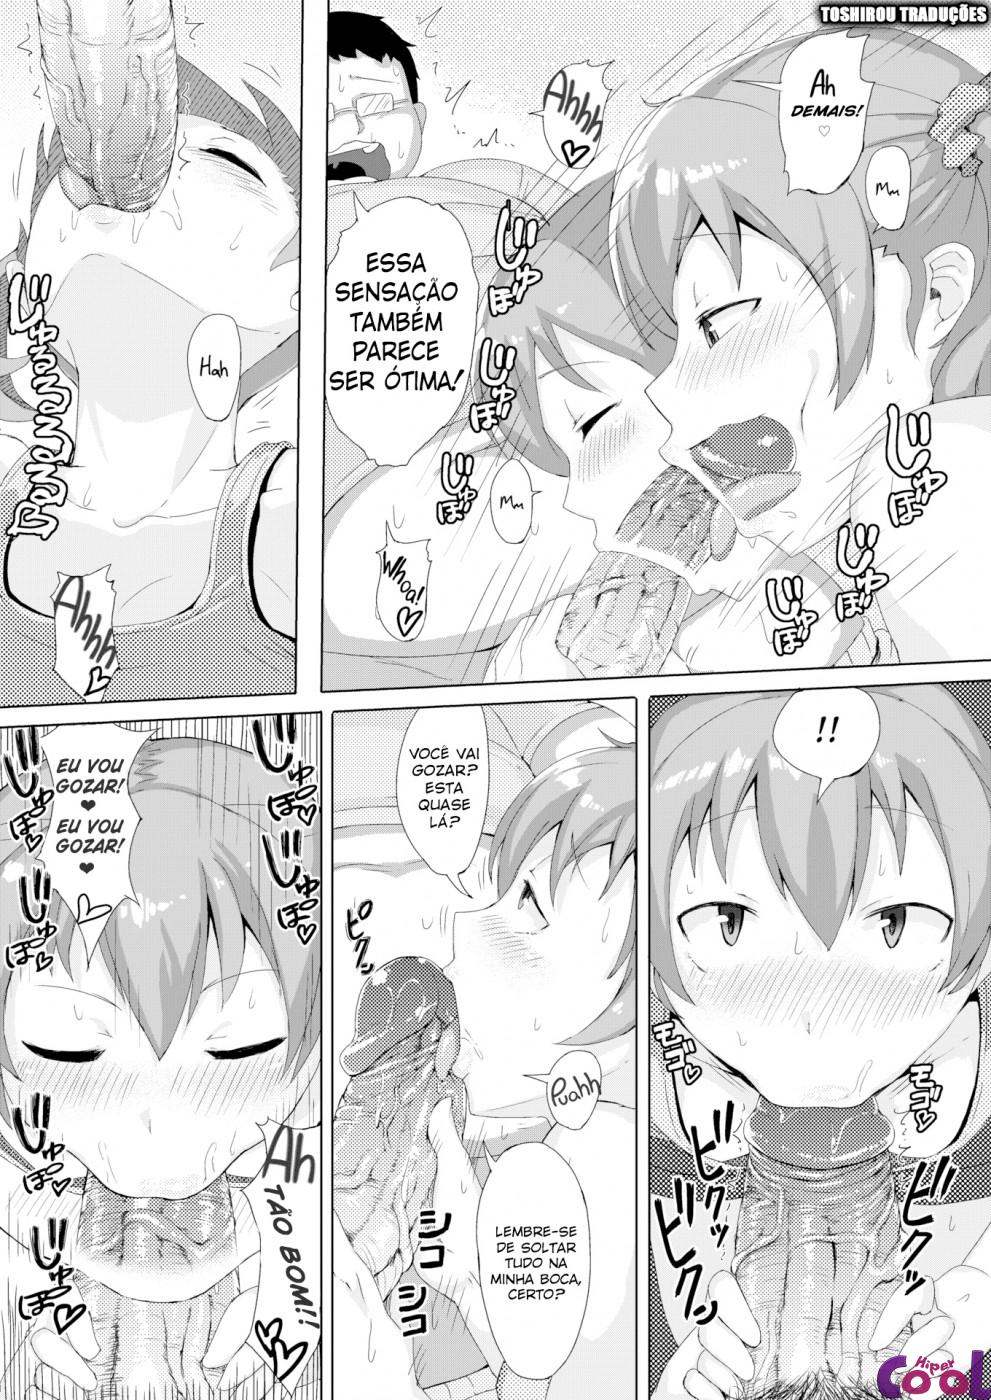 lenient-little-sister-chapter-01-page-6.jpg